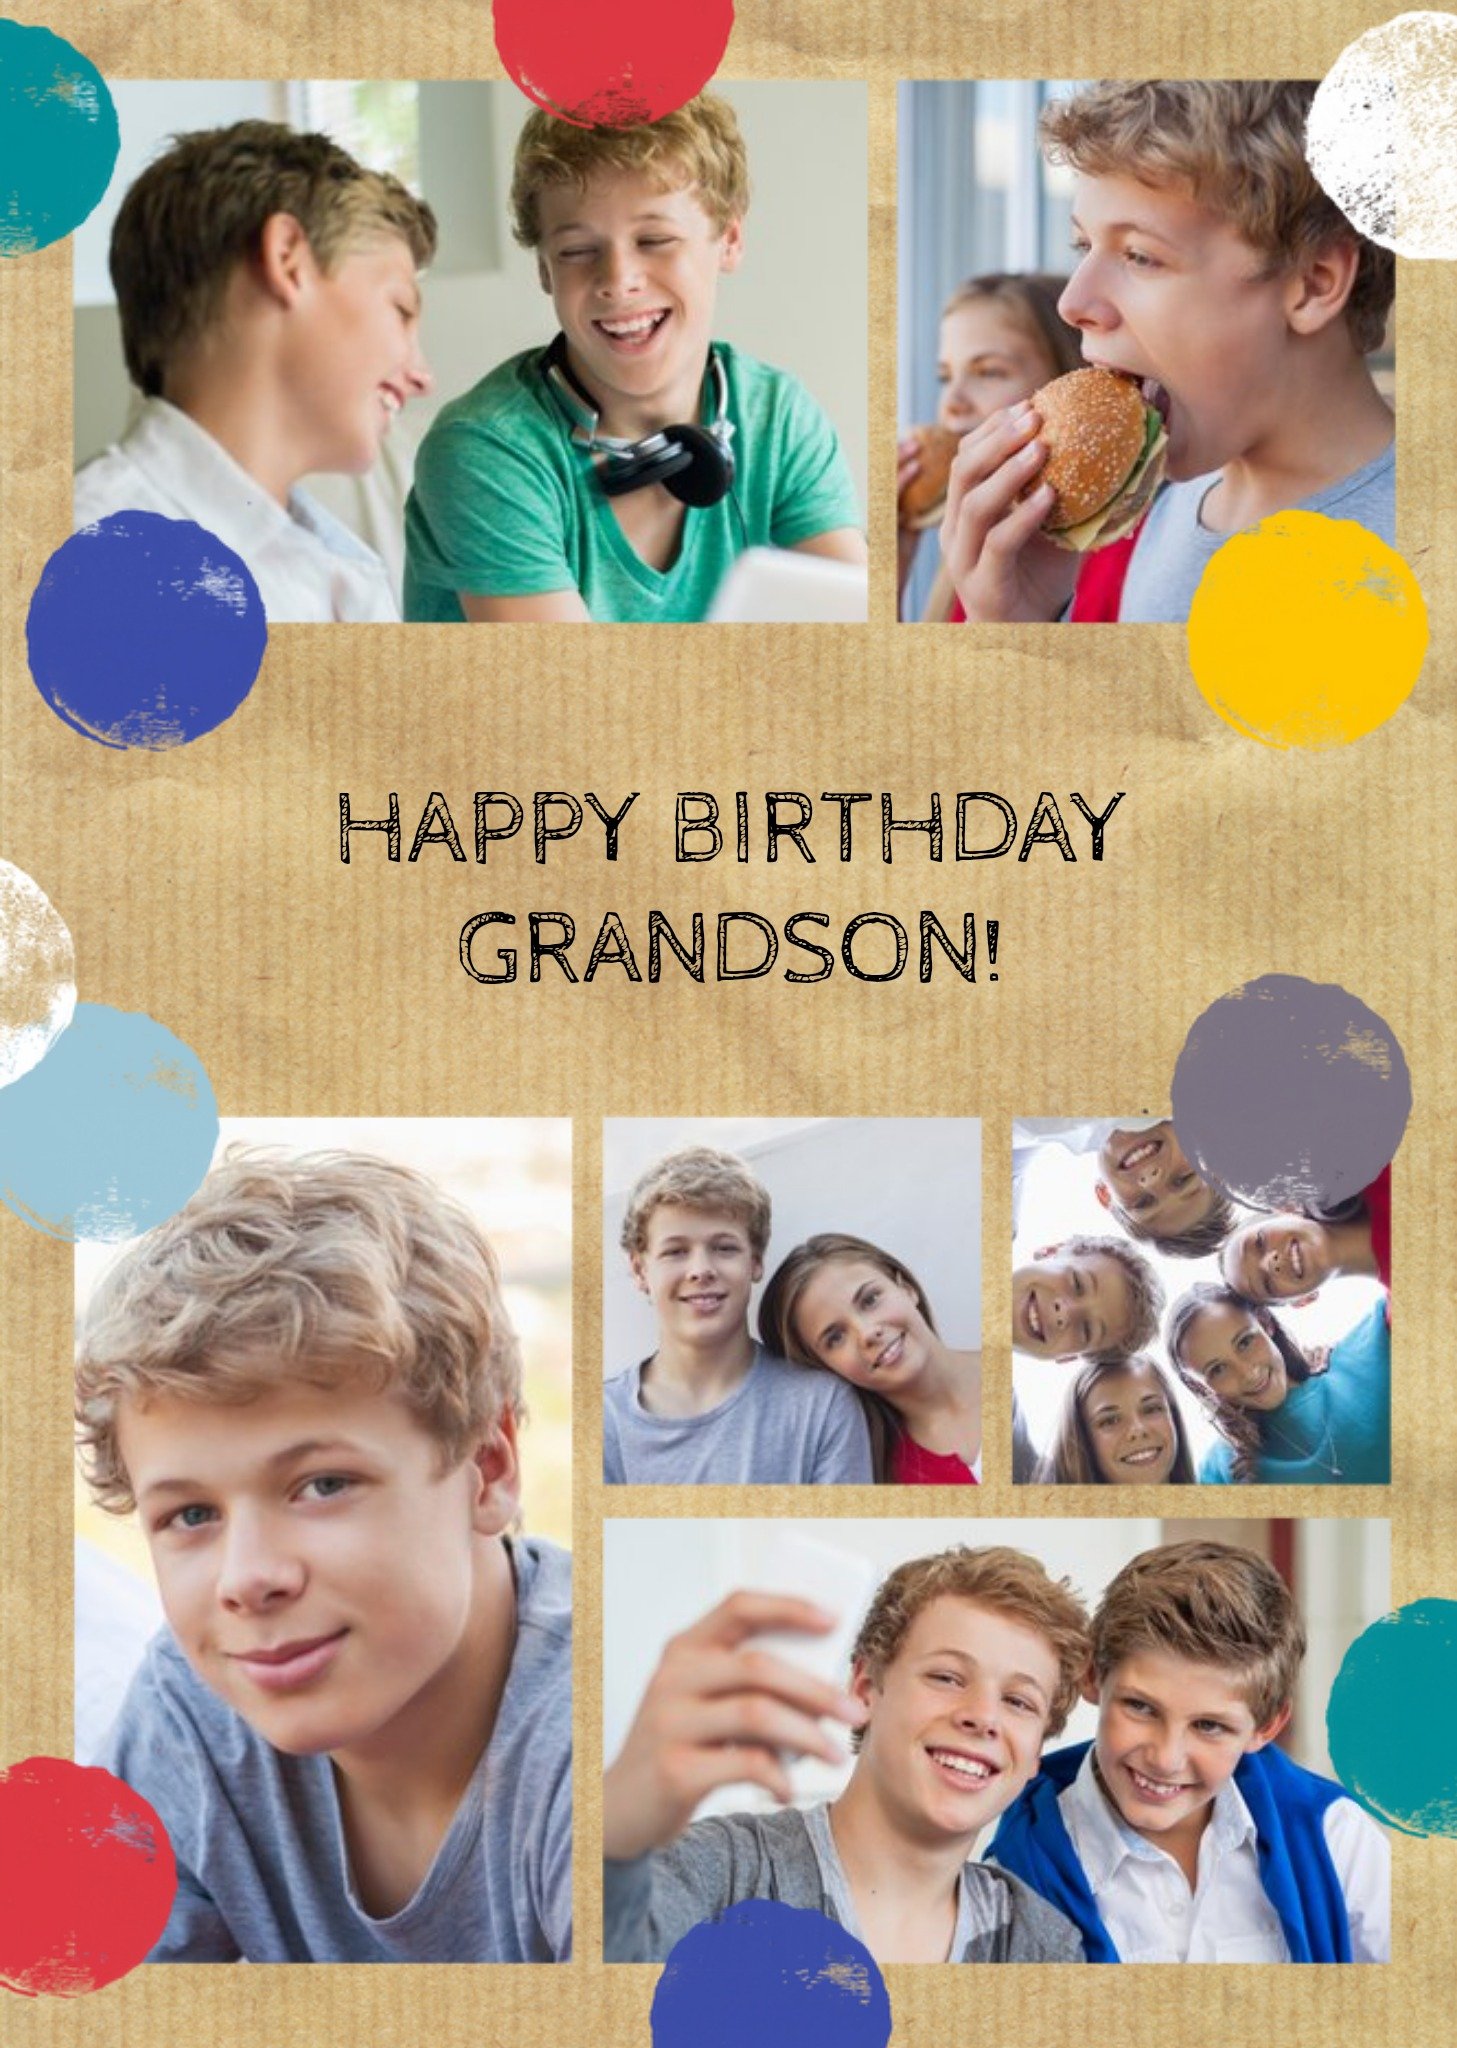 Moonpig Colourful Spots Personalised Photo Upload Happy Birthday Card For Grandson, Large